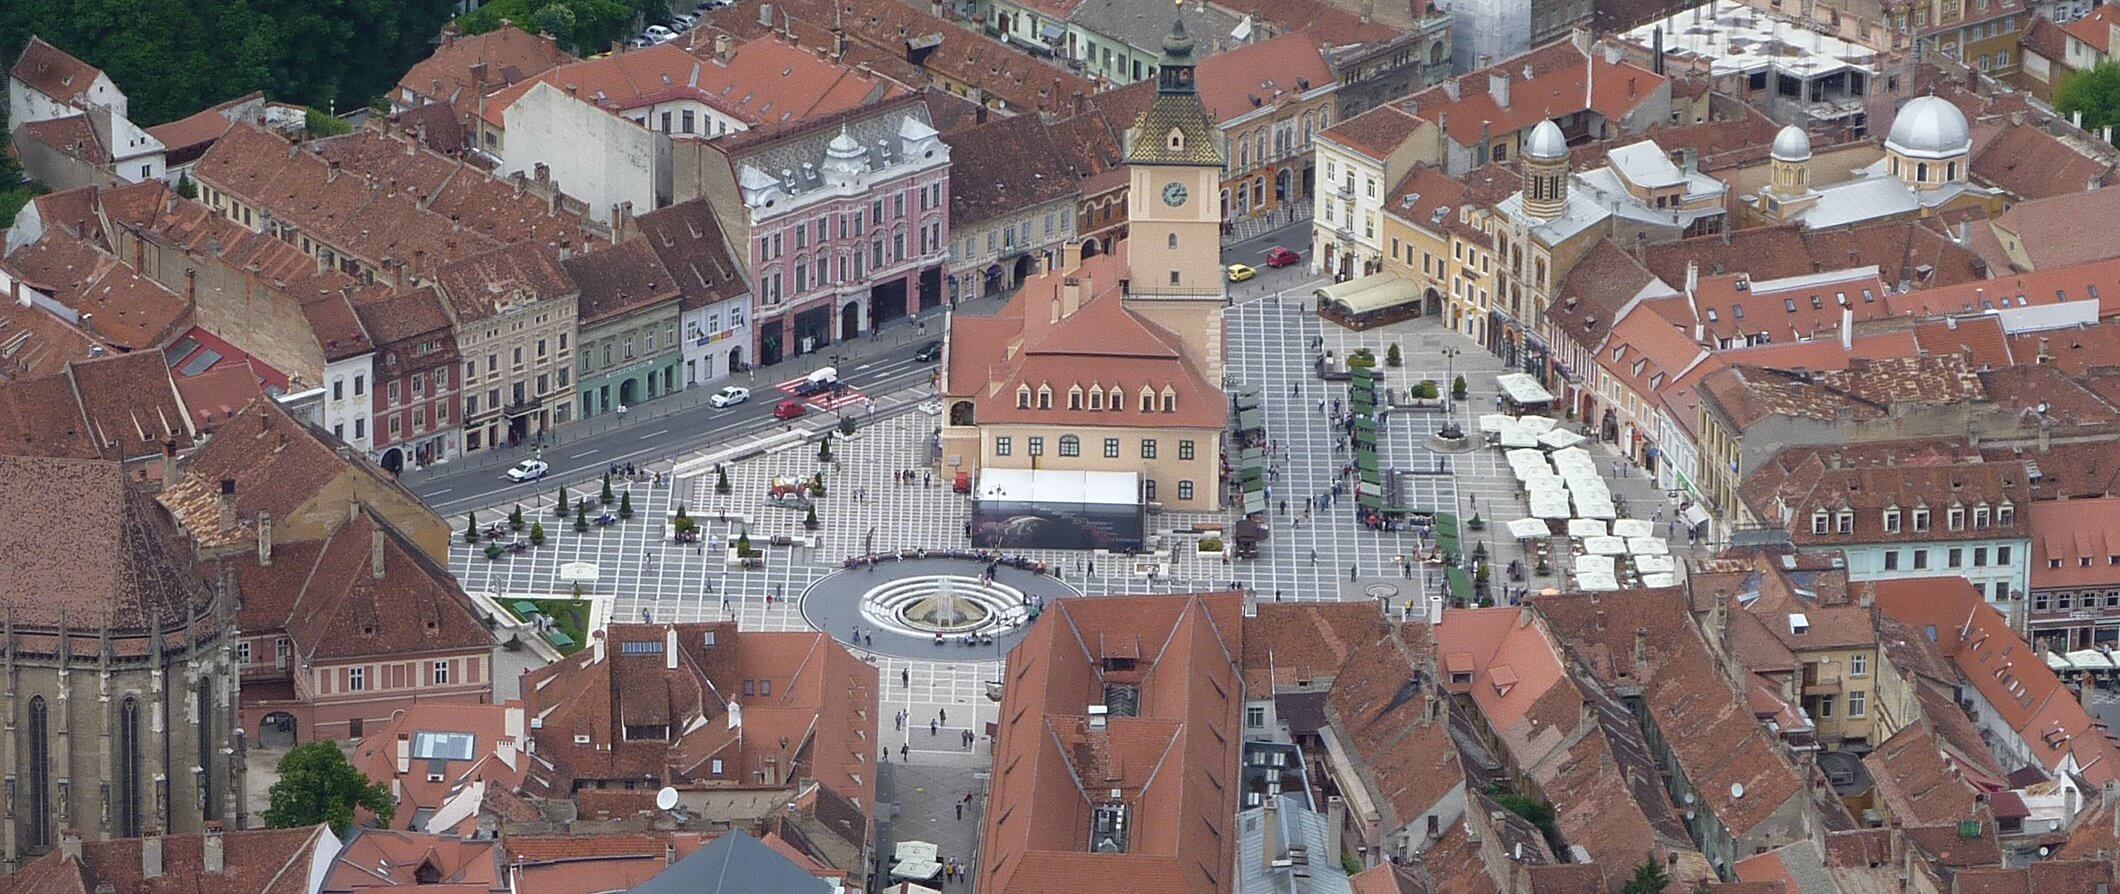 areal view of Brasov in Romania looking down over the town centre church